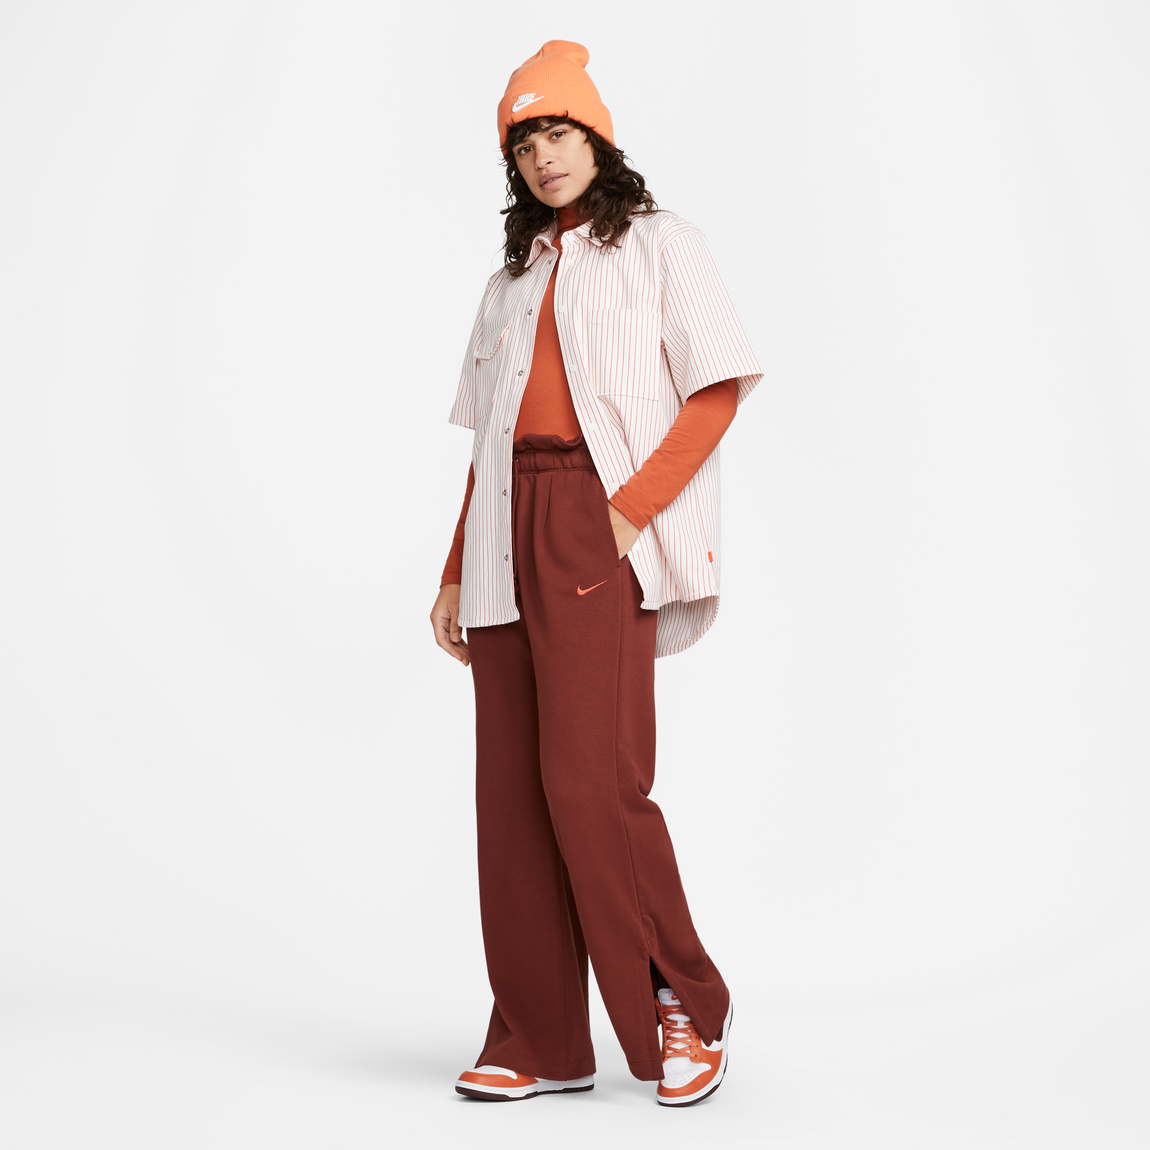 Genuine Nike long pants quick-drying casual women's pants outlets Taobo  Sports official flagship store discount